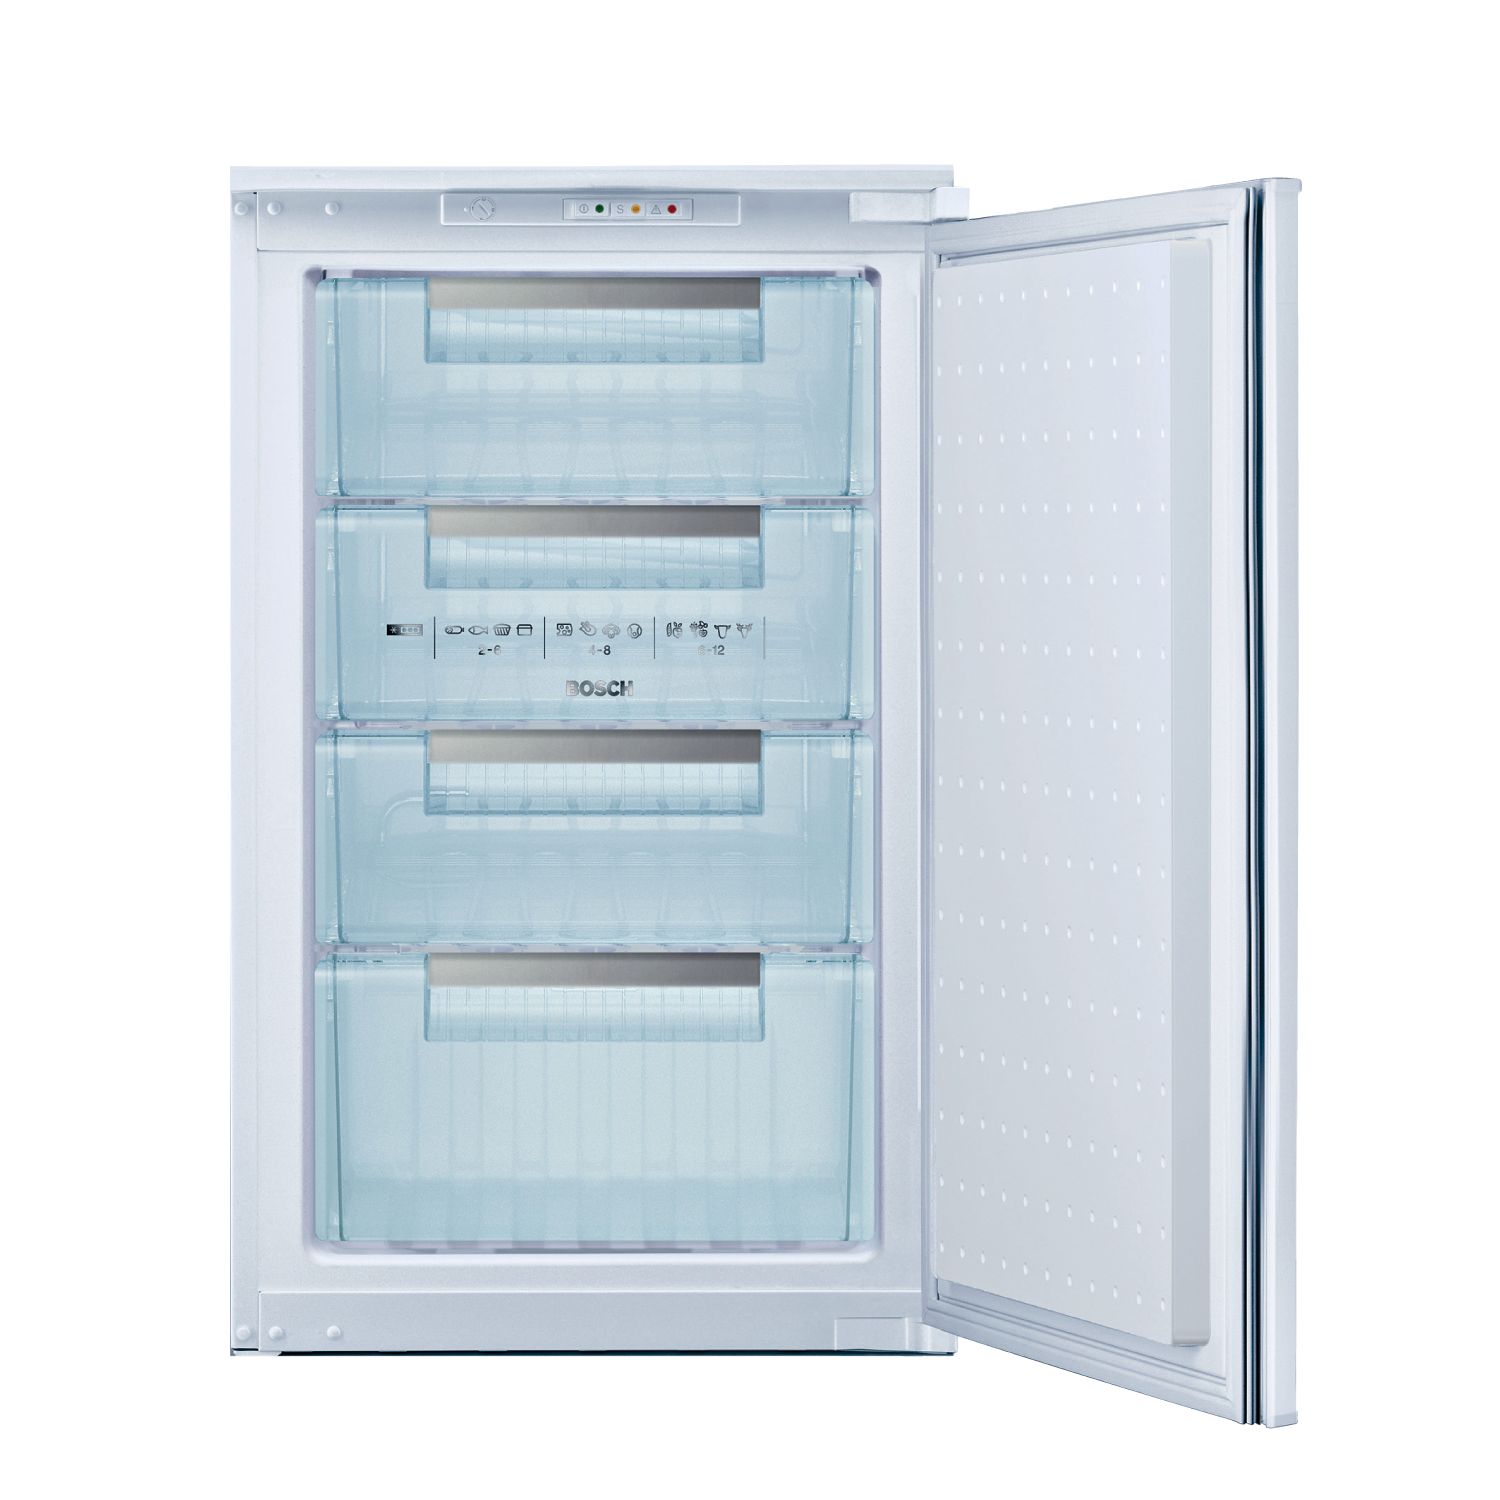 Bosch GID18A20GB Integrated Freezer, A+ Energy Rating, 54cm Wide